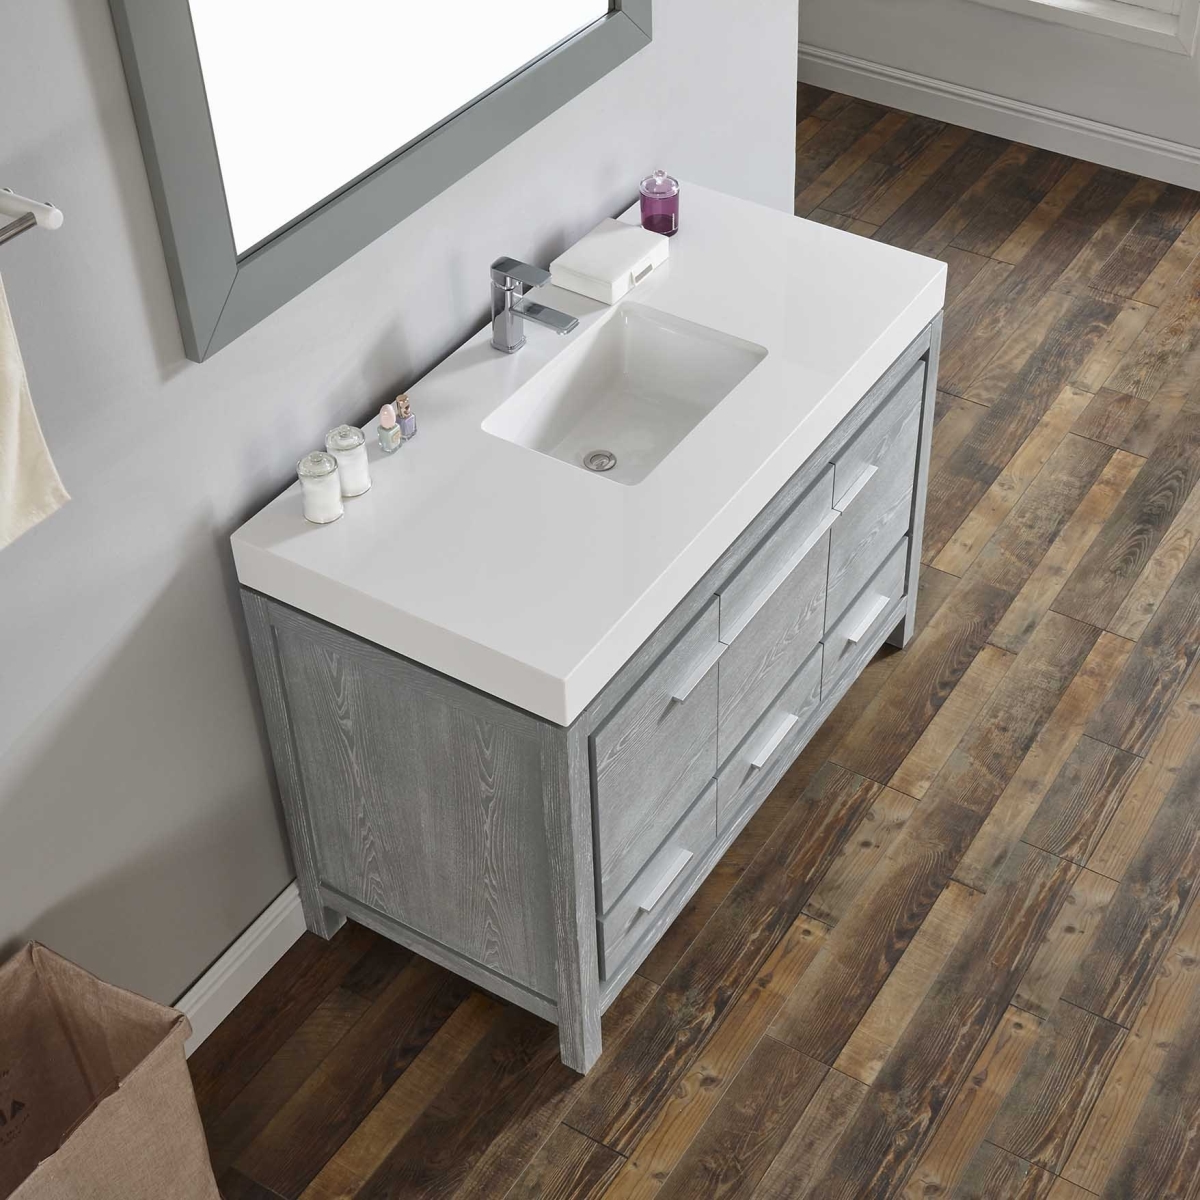 Gk48s-130e-a 48 In. Milton Grey Oak Single Vanity With Wide Line Counter - Acrylic